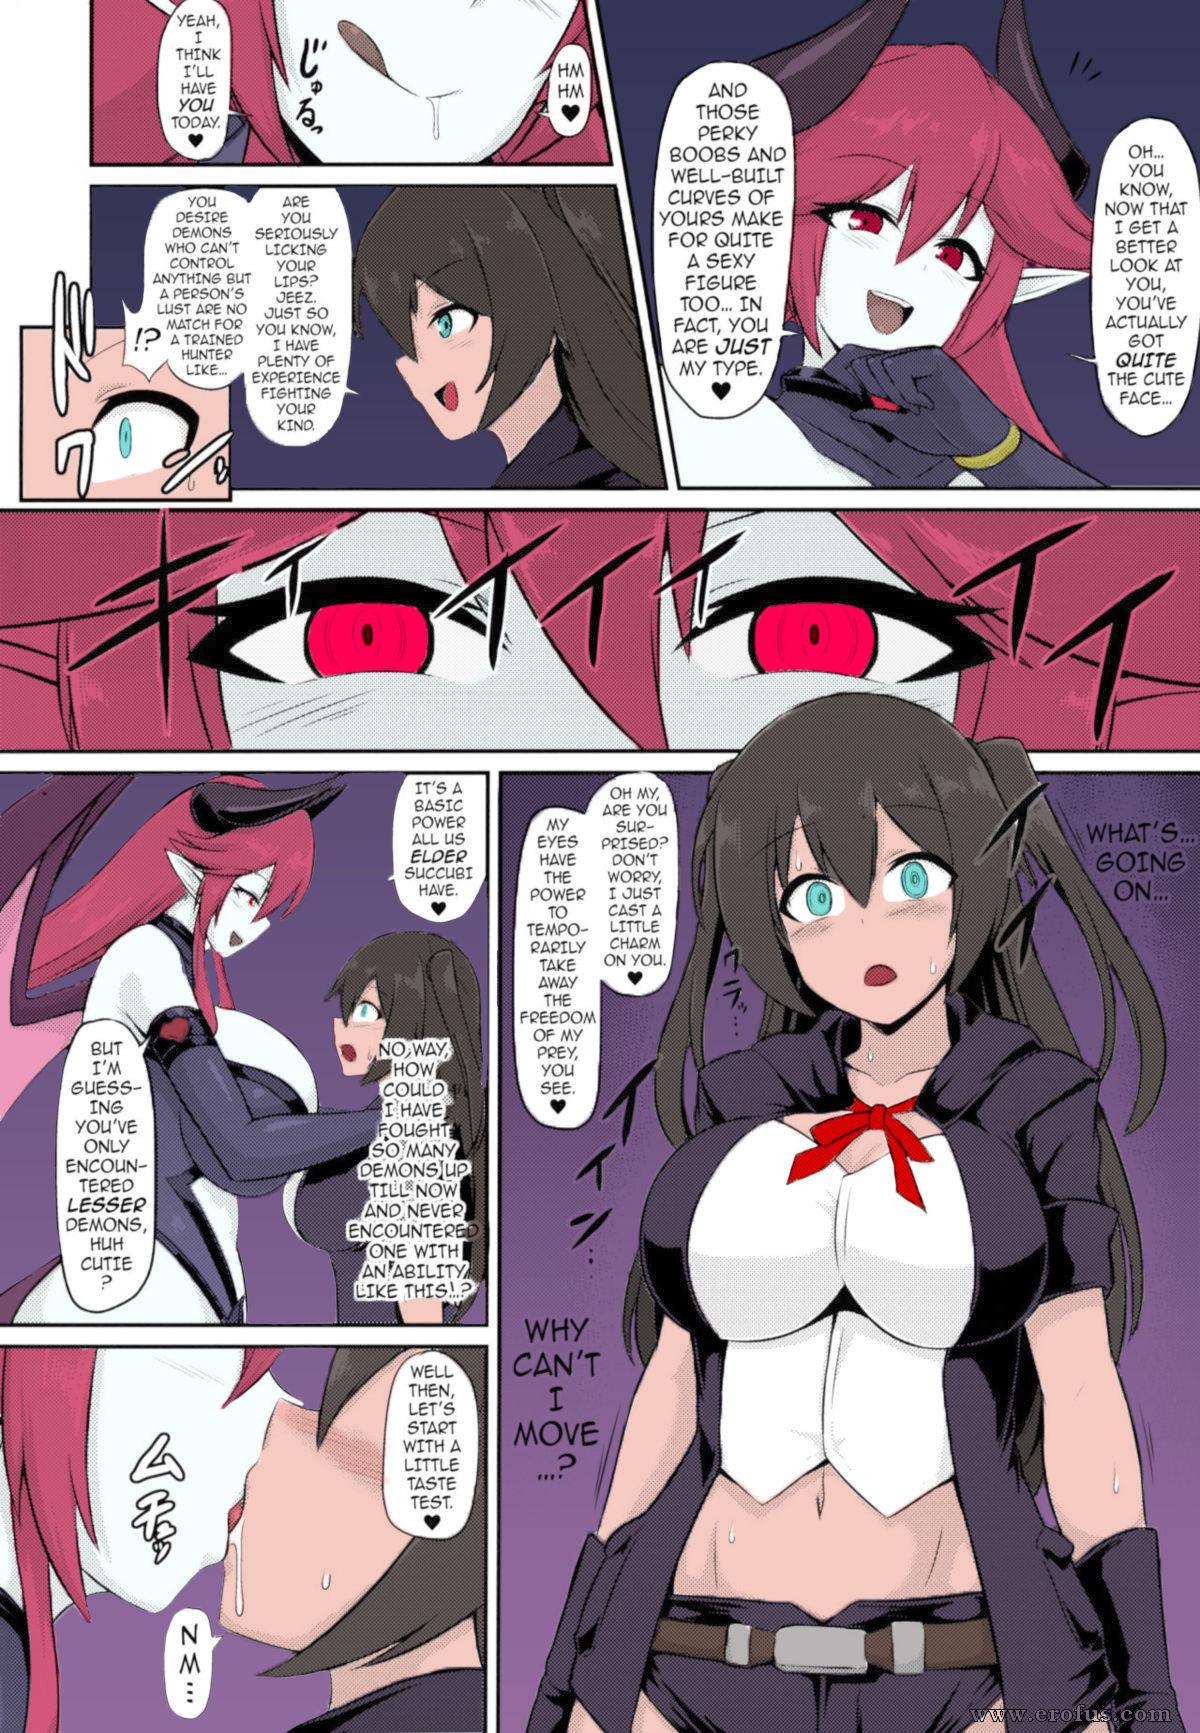 Music A Lesbian Succubu´s Lust Crest Pleasure Training - COLOR- Ongoing Fit - Page 3